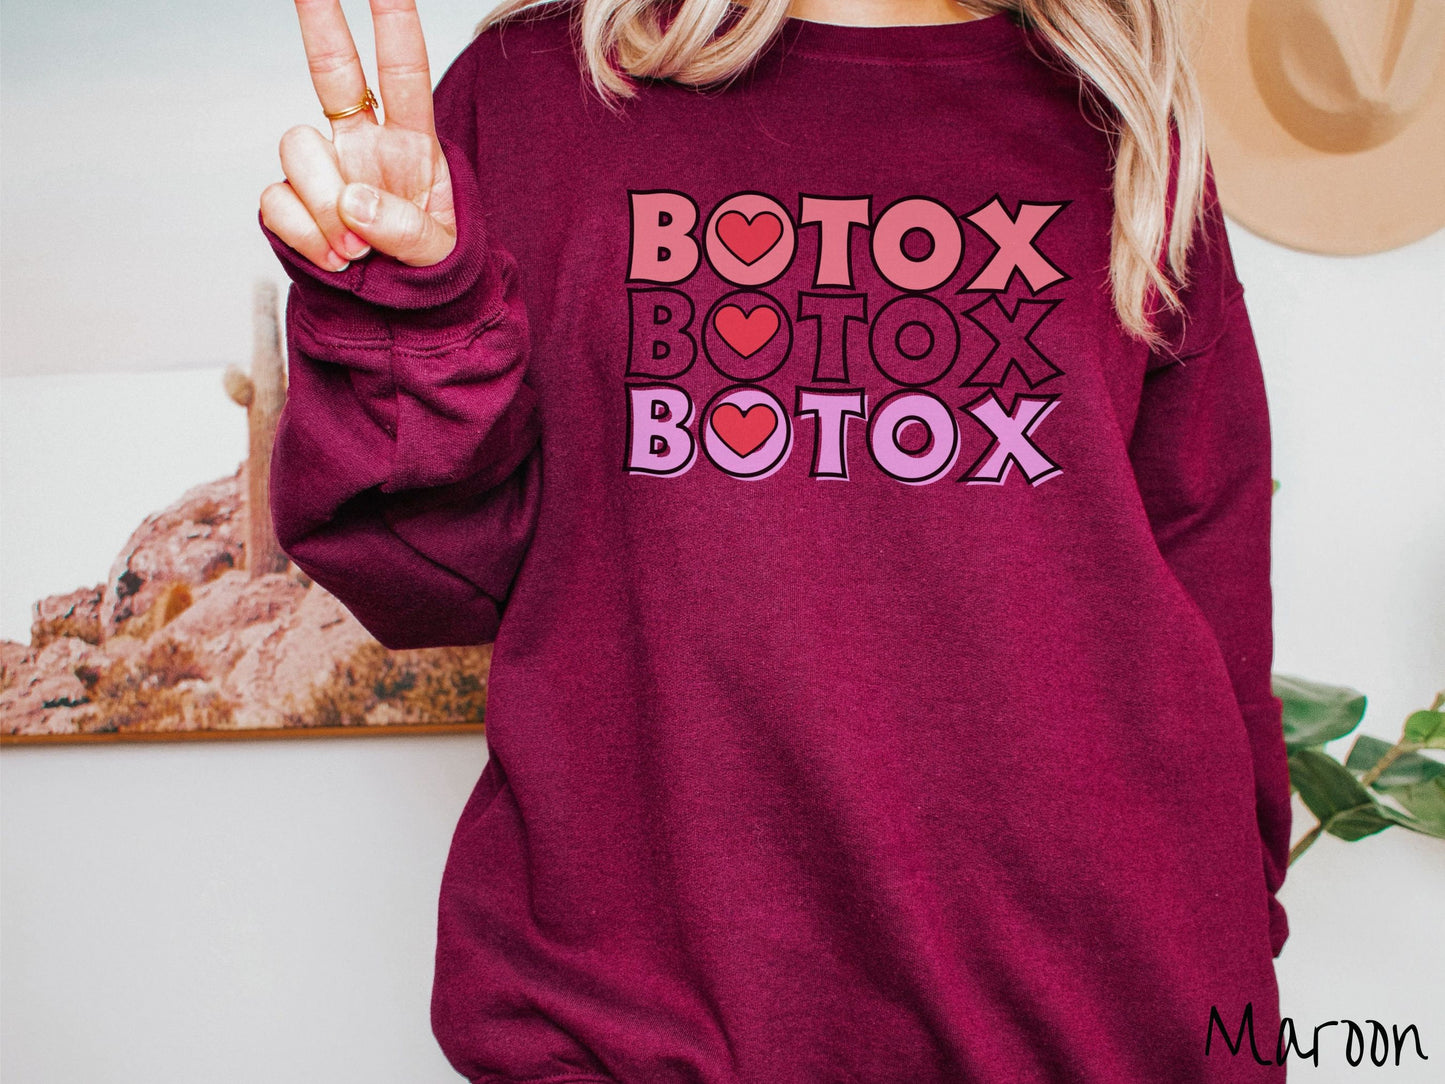 A woman wearing a cute maroon colored sweatshirt with the word Botox listed three times in different shades of pink and red, with red hearts inside the first letter O in Botox.